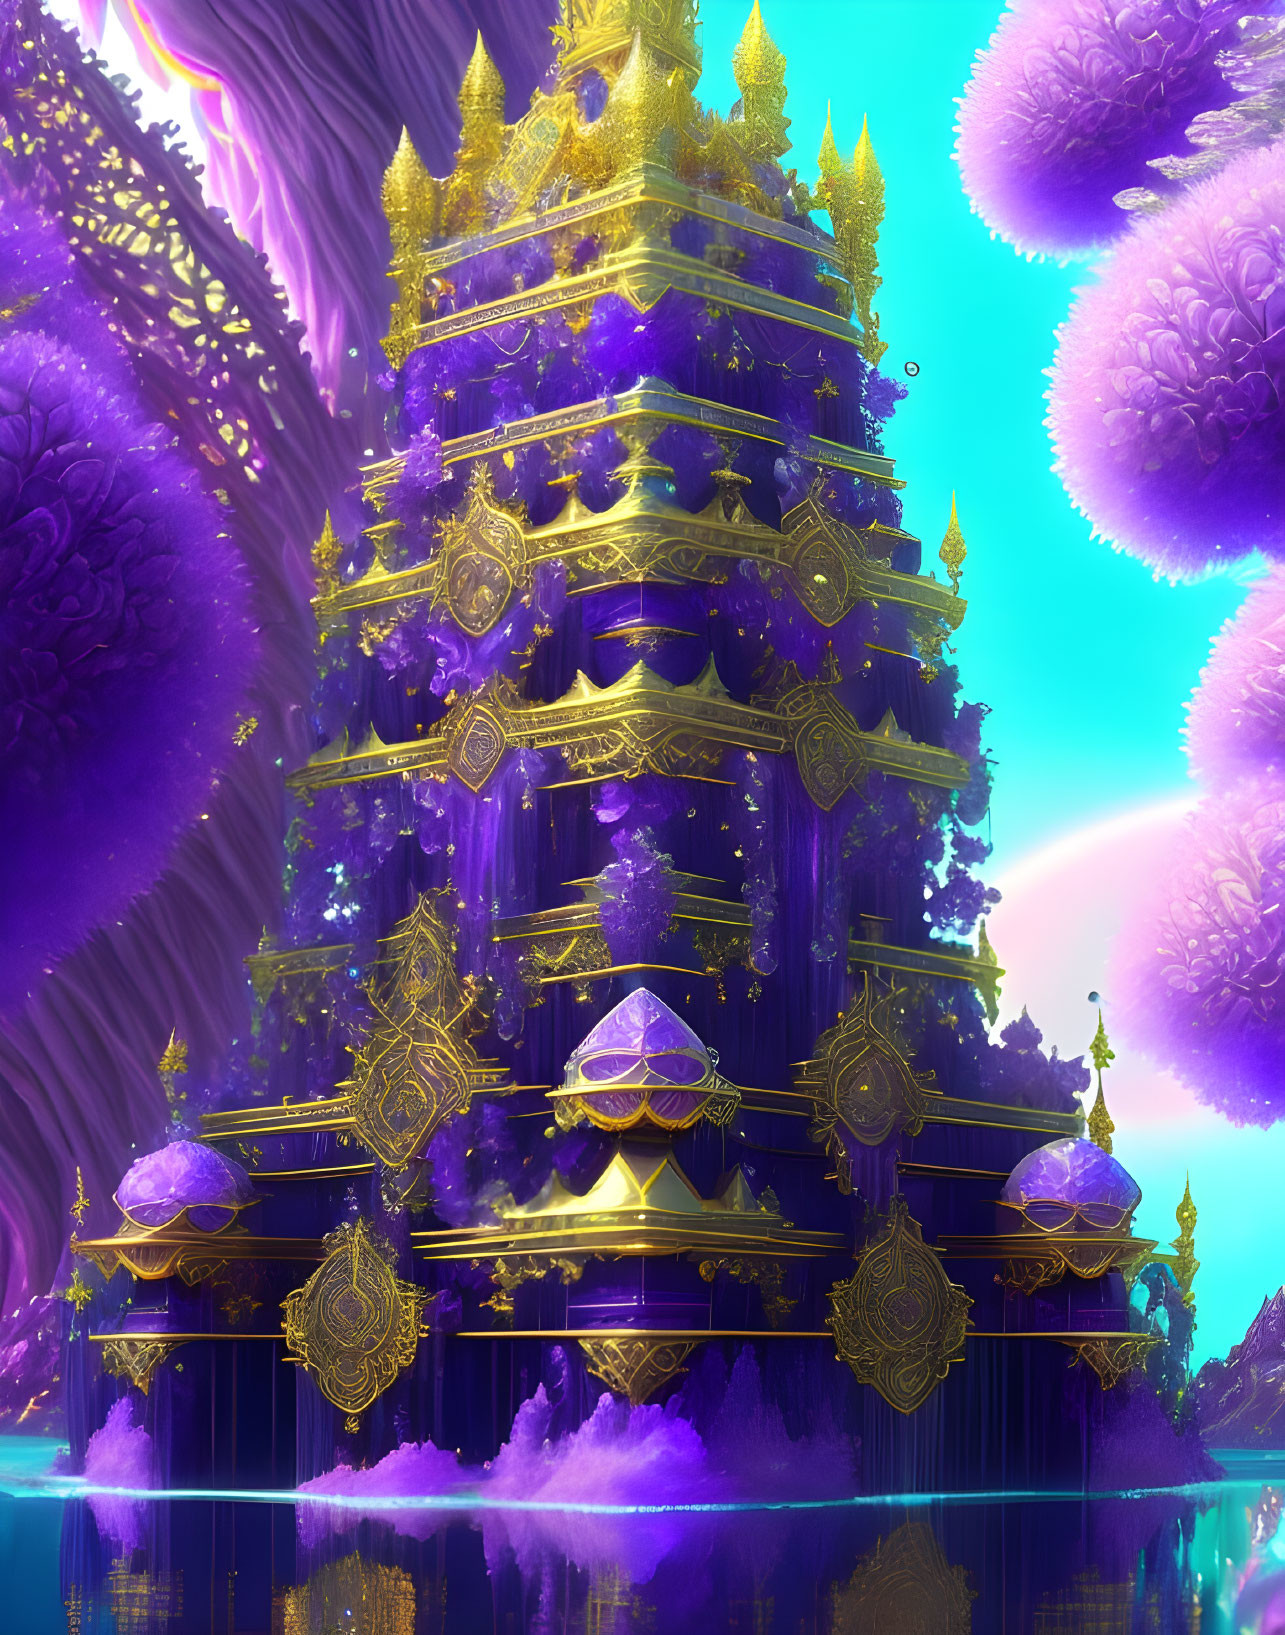 Golden temple with intricate designs in a fantastical landscape